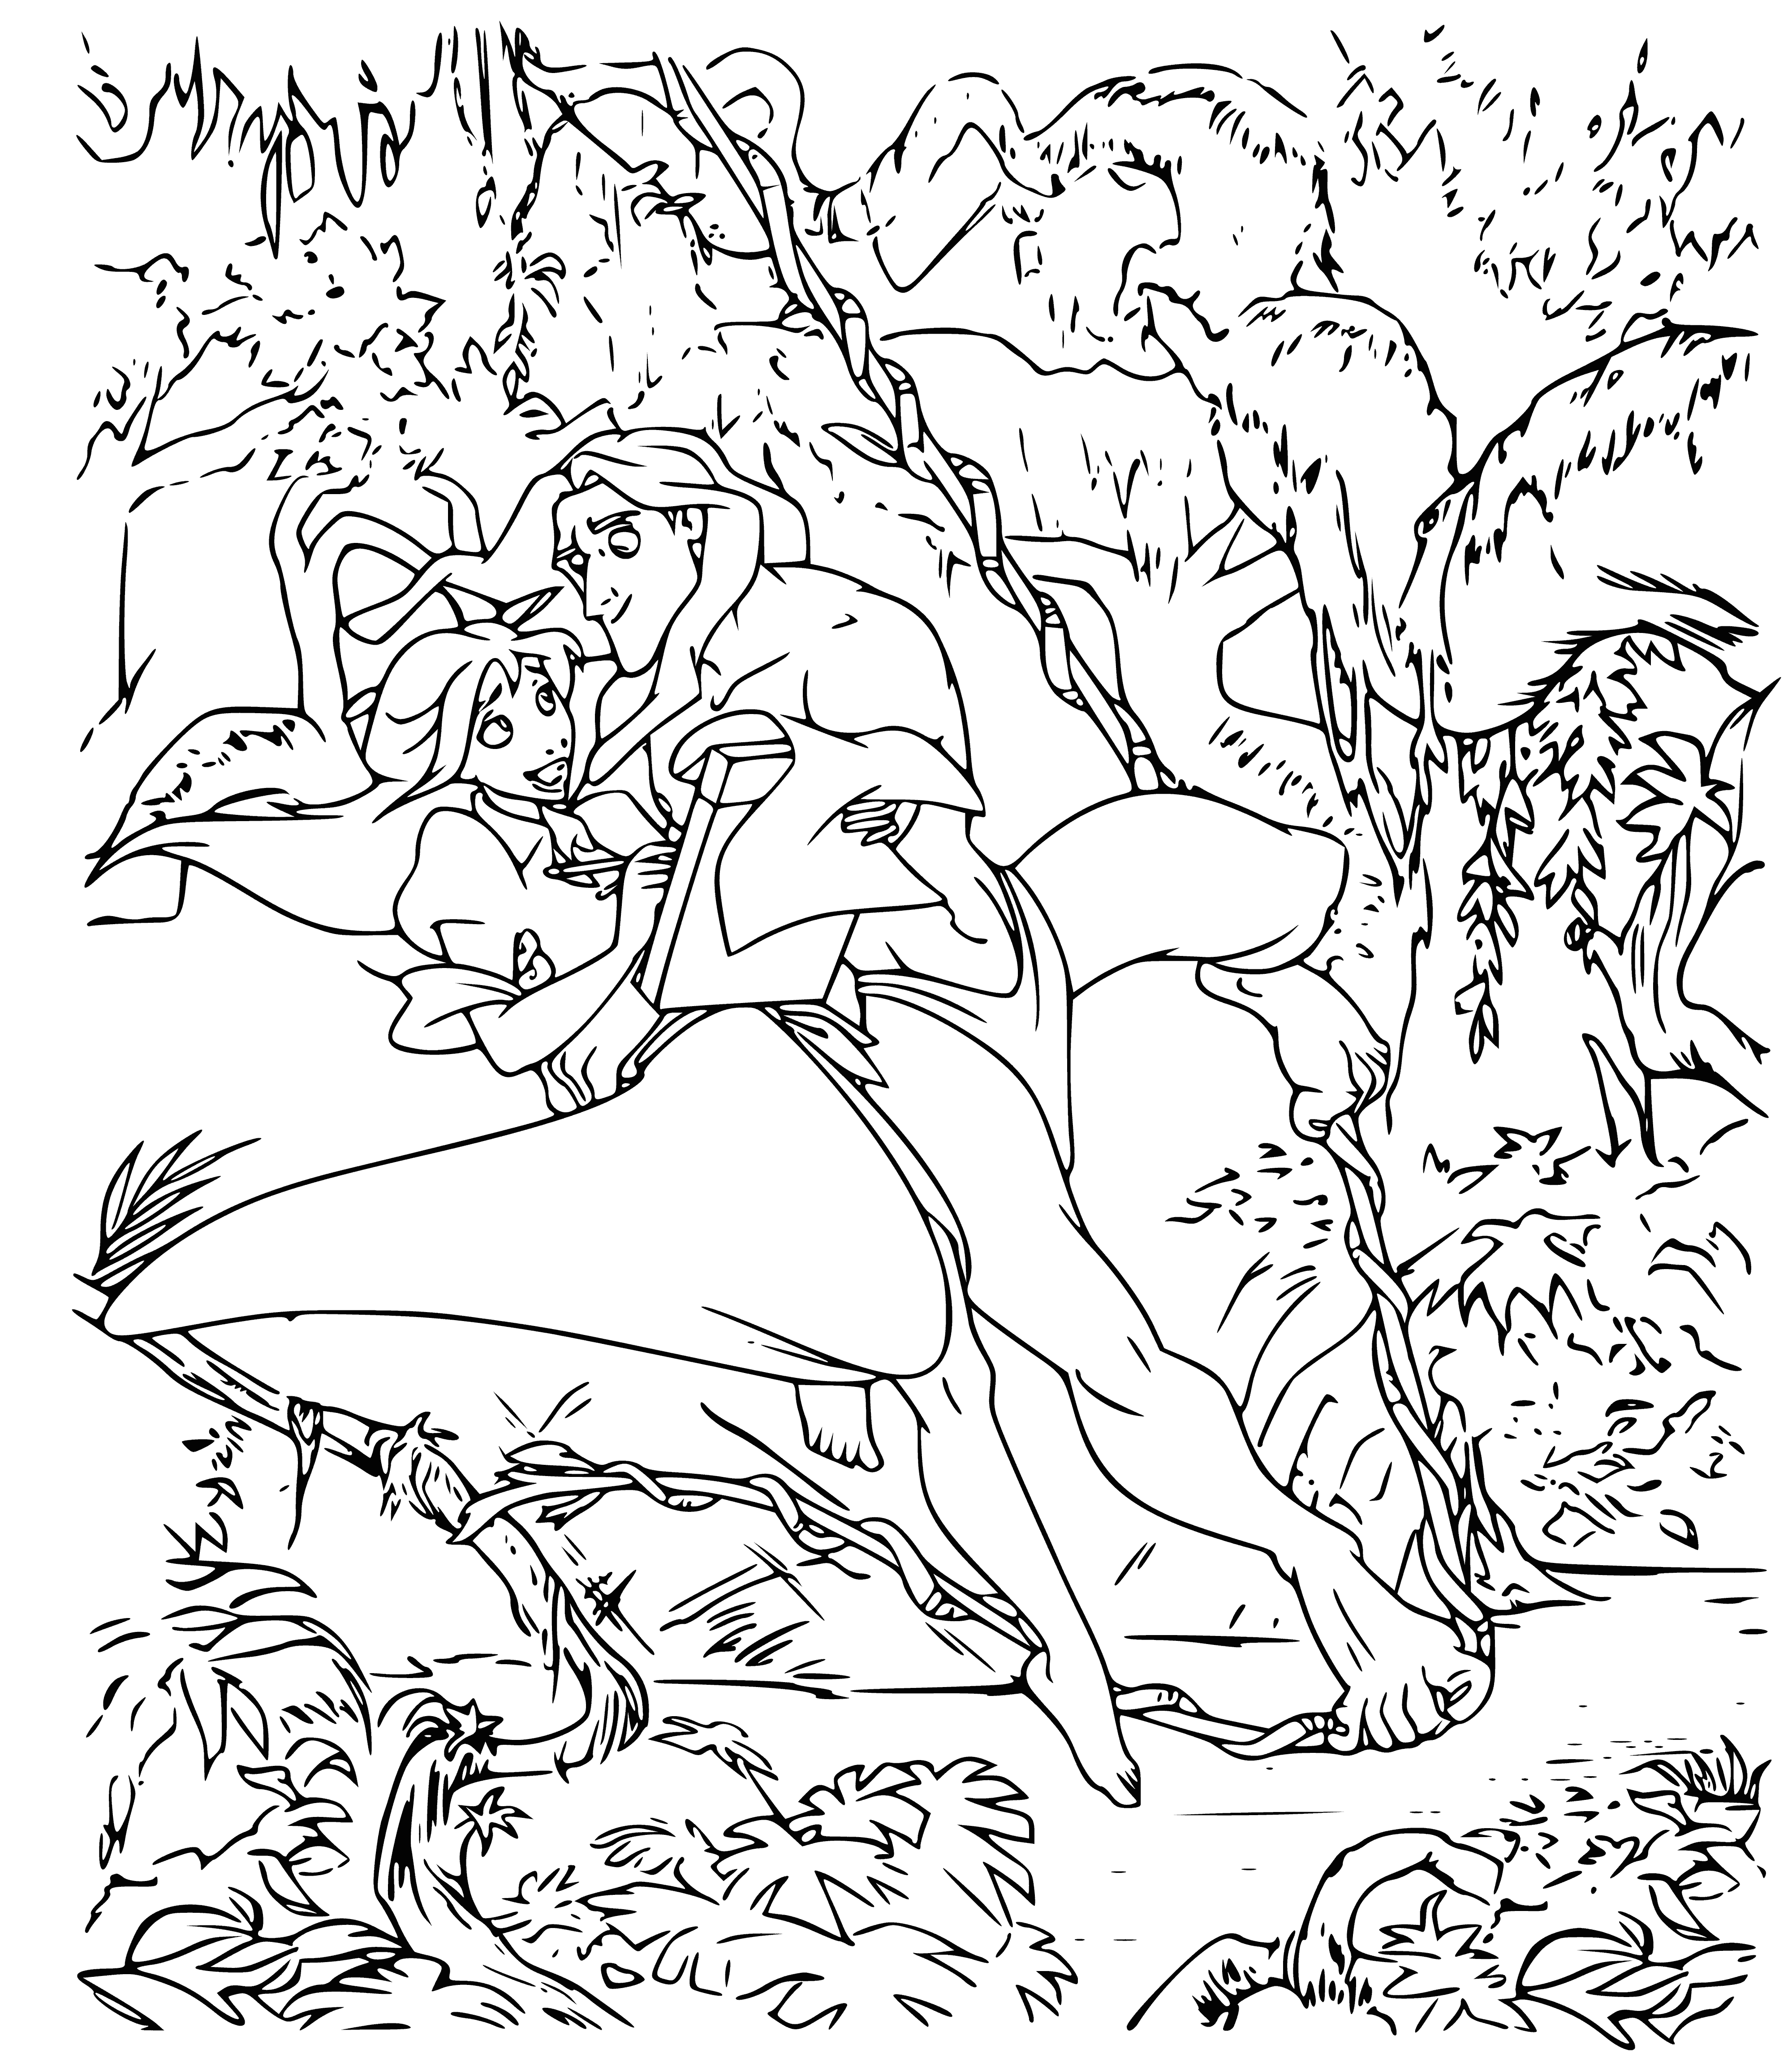 coloring page: A shirtless man with short black hair holds a woman wearing a white dress and with long black hair in his arms as they swing on a vine above a river in a black and white coloring page.